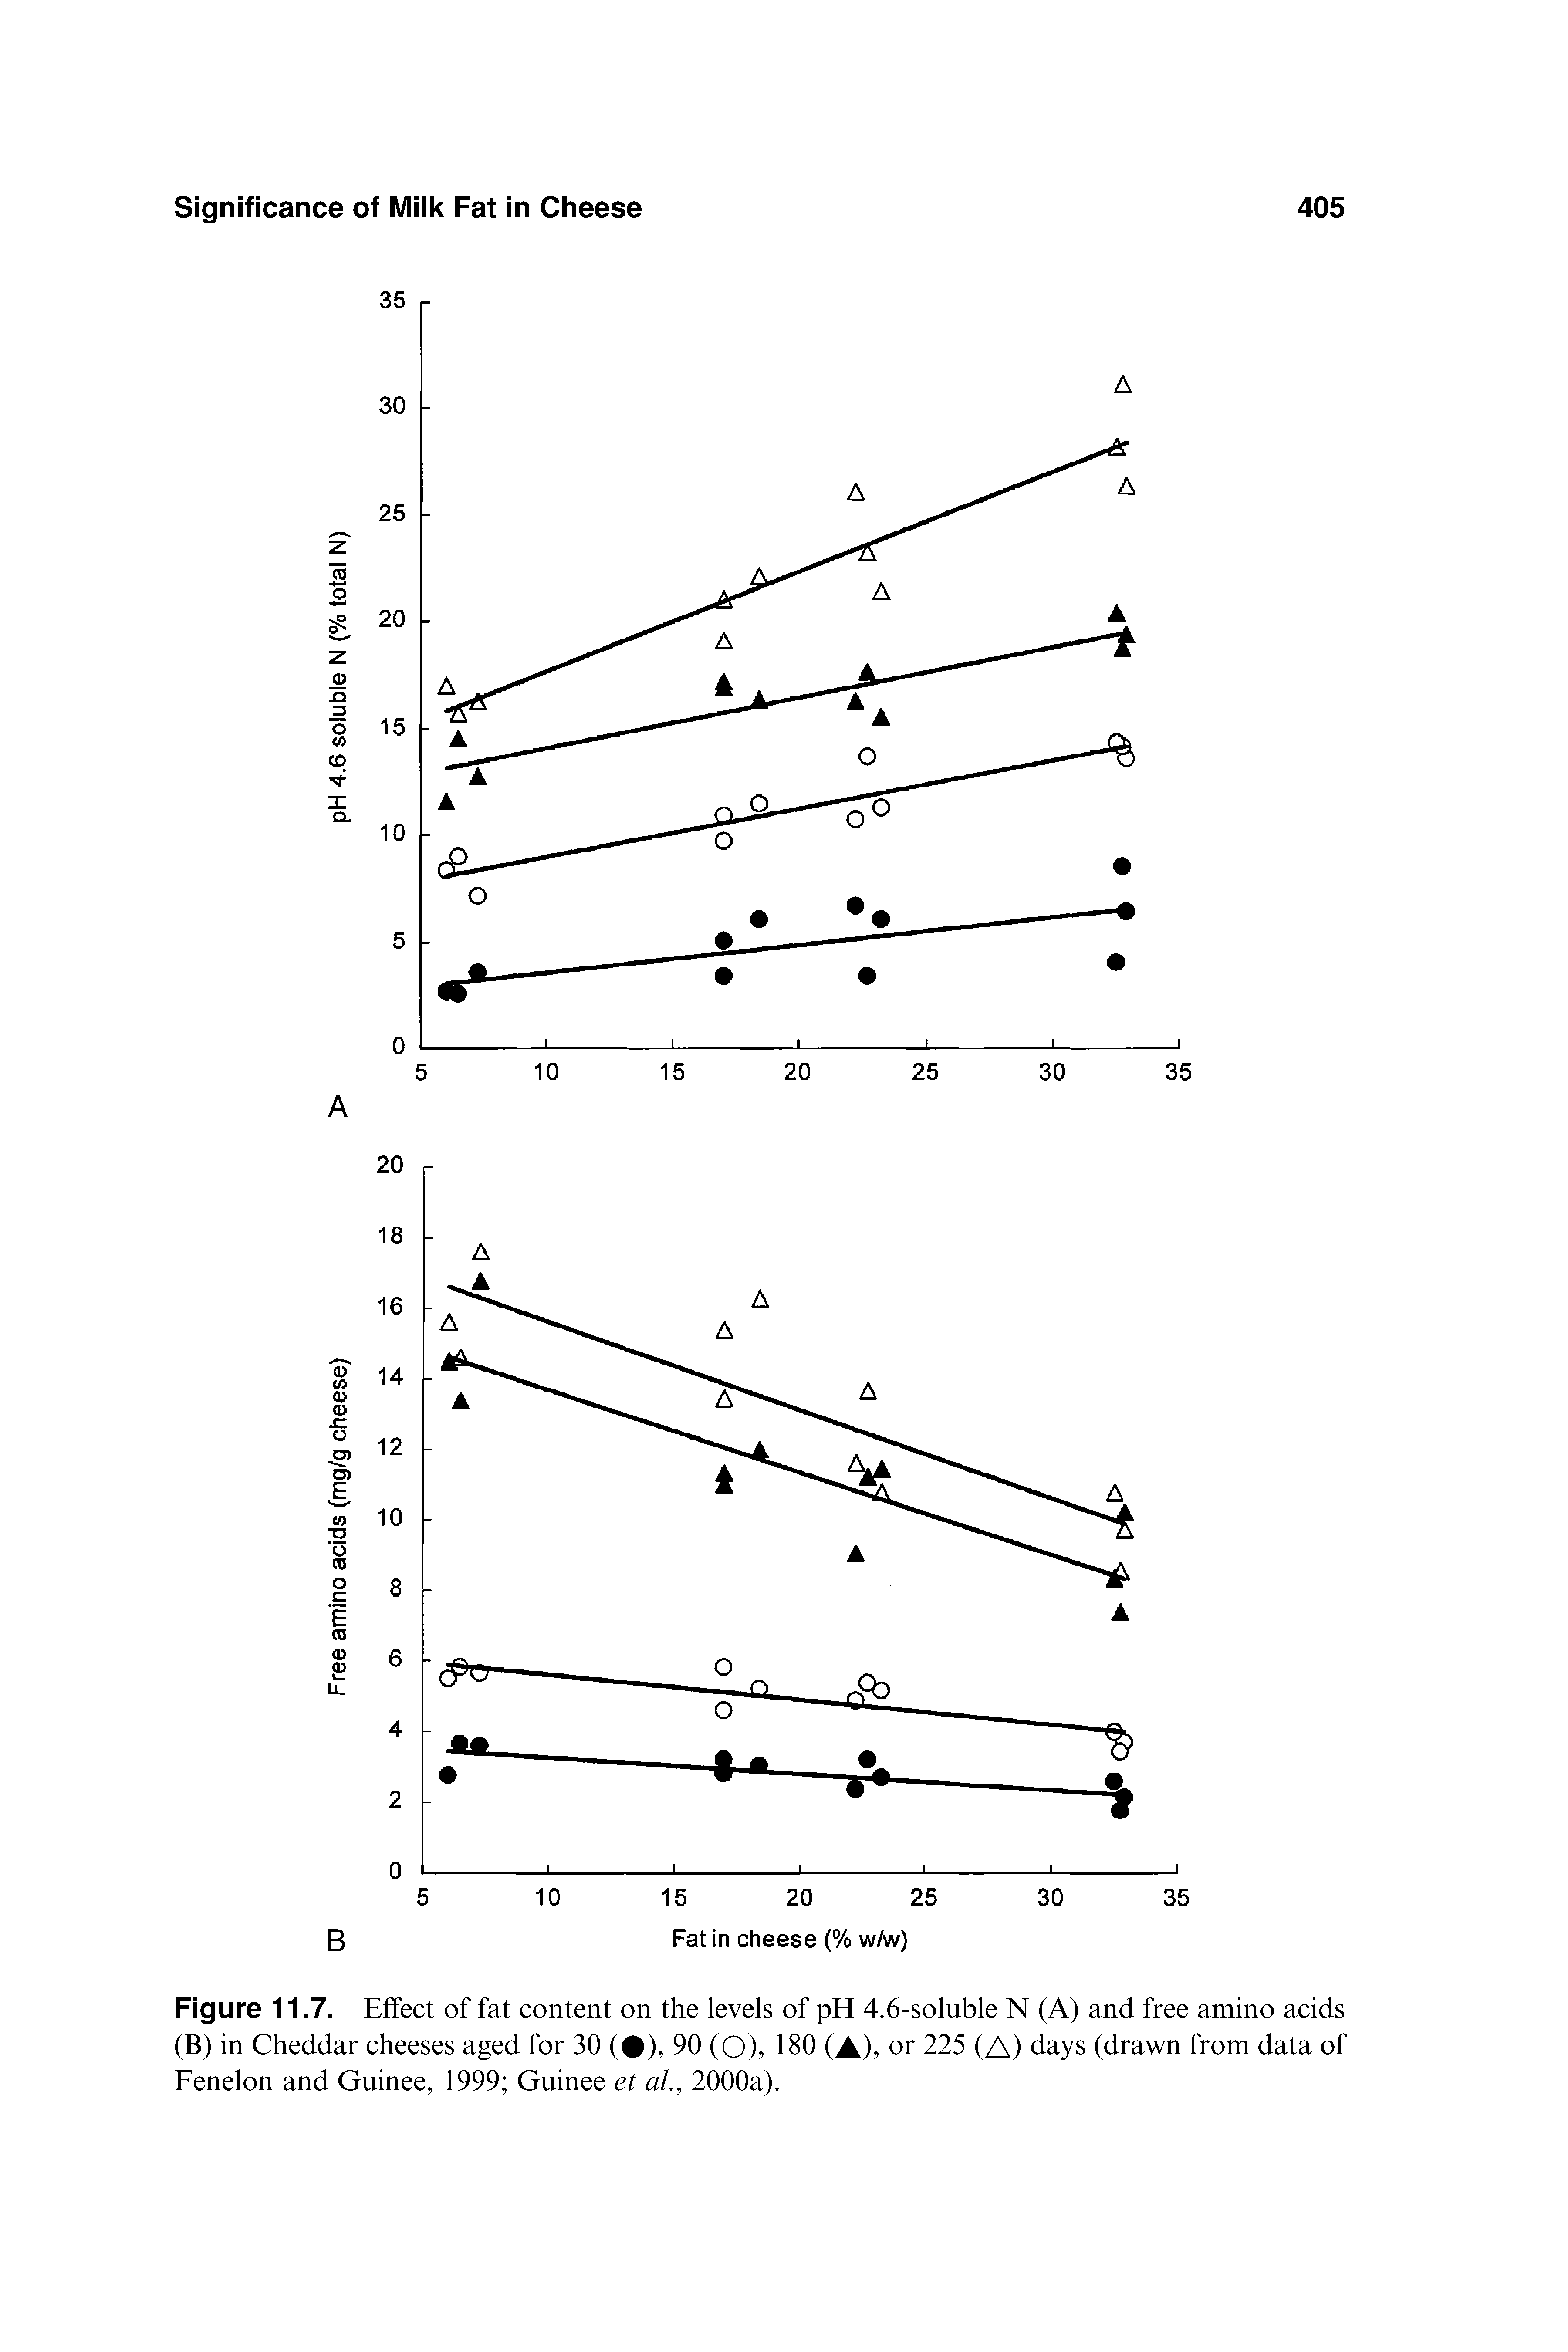 Figure 11.7. Effect of fat content on the levels of pH 4.6-soluble N (A) and free amino acids (B) in Cheddar cheeses aged for 30 ( ), 90 (O), 180 (A), or 225 (A) days (drawn from data of Fenelon and Guinee, 1999 Guinee et al., 2000a).